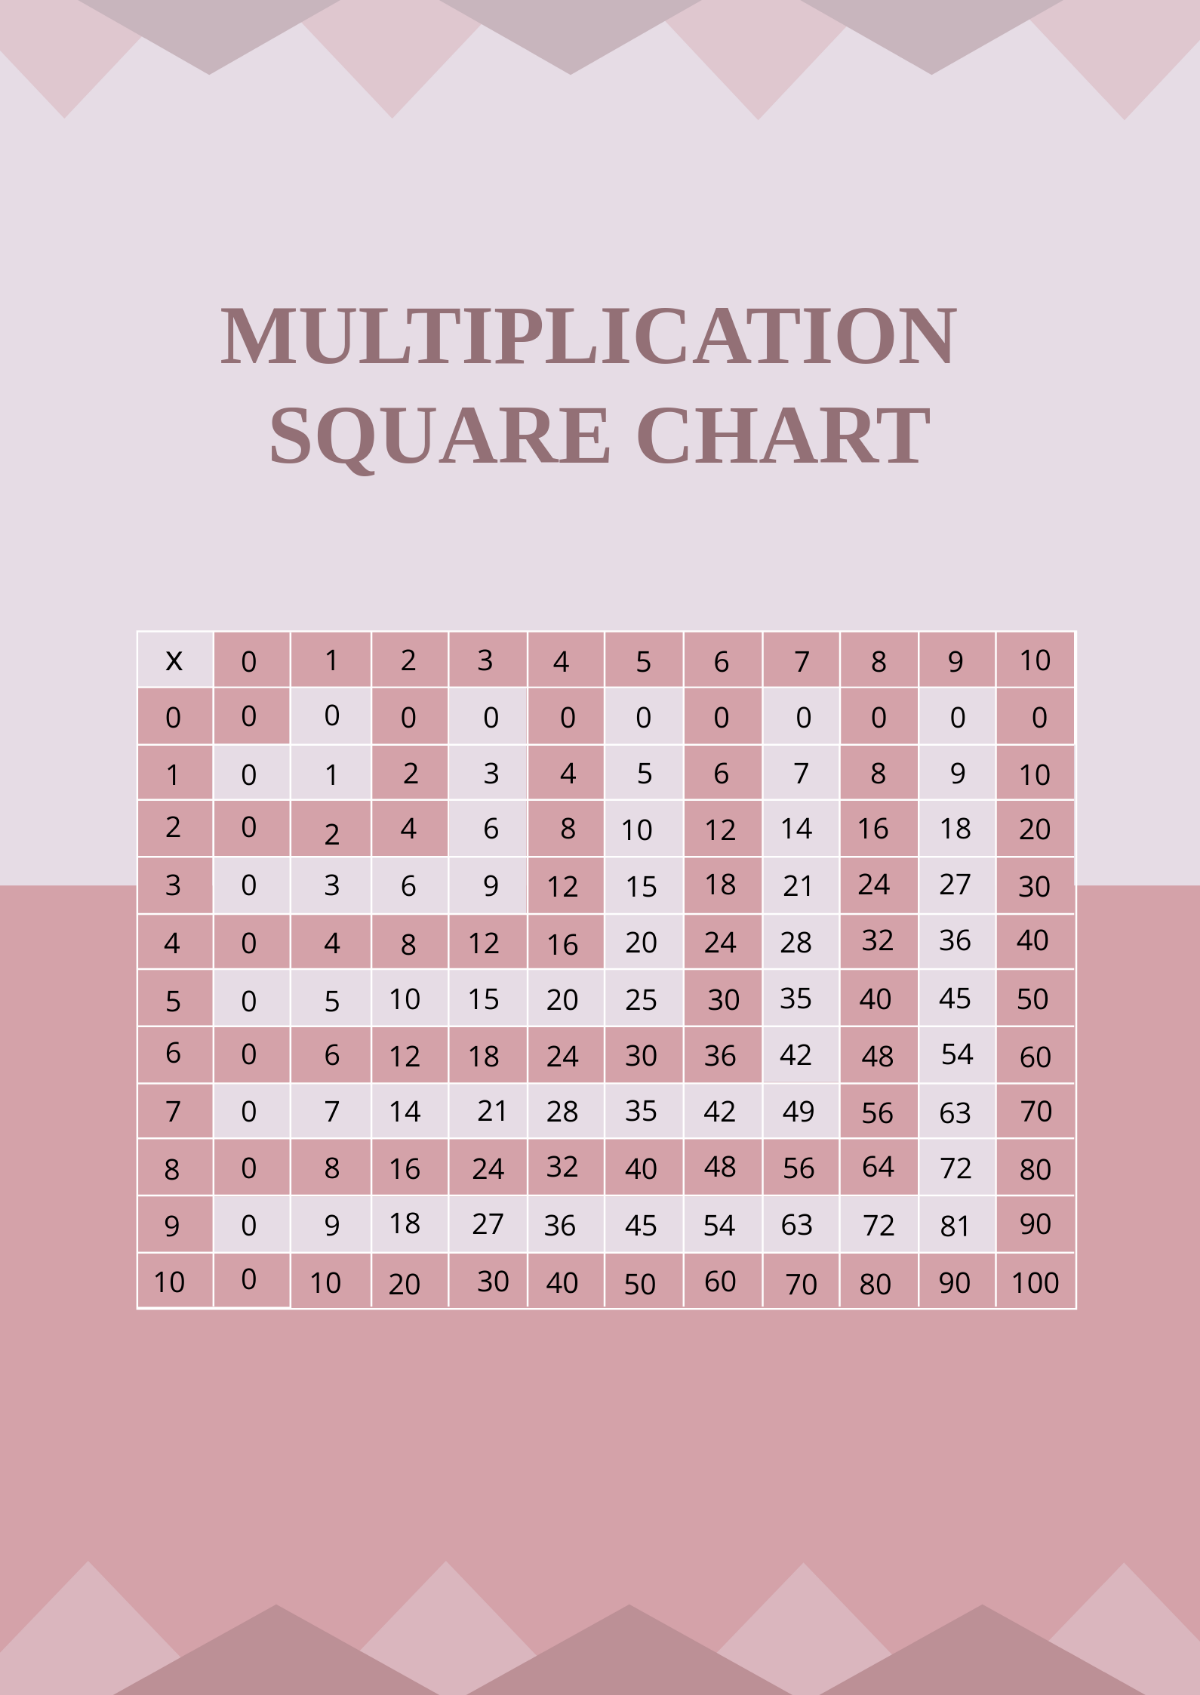 Multiplication Square  Chart Template